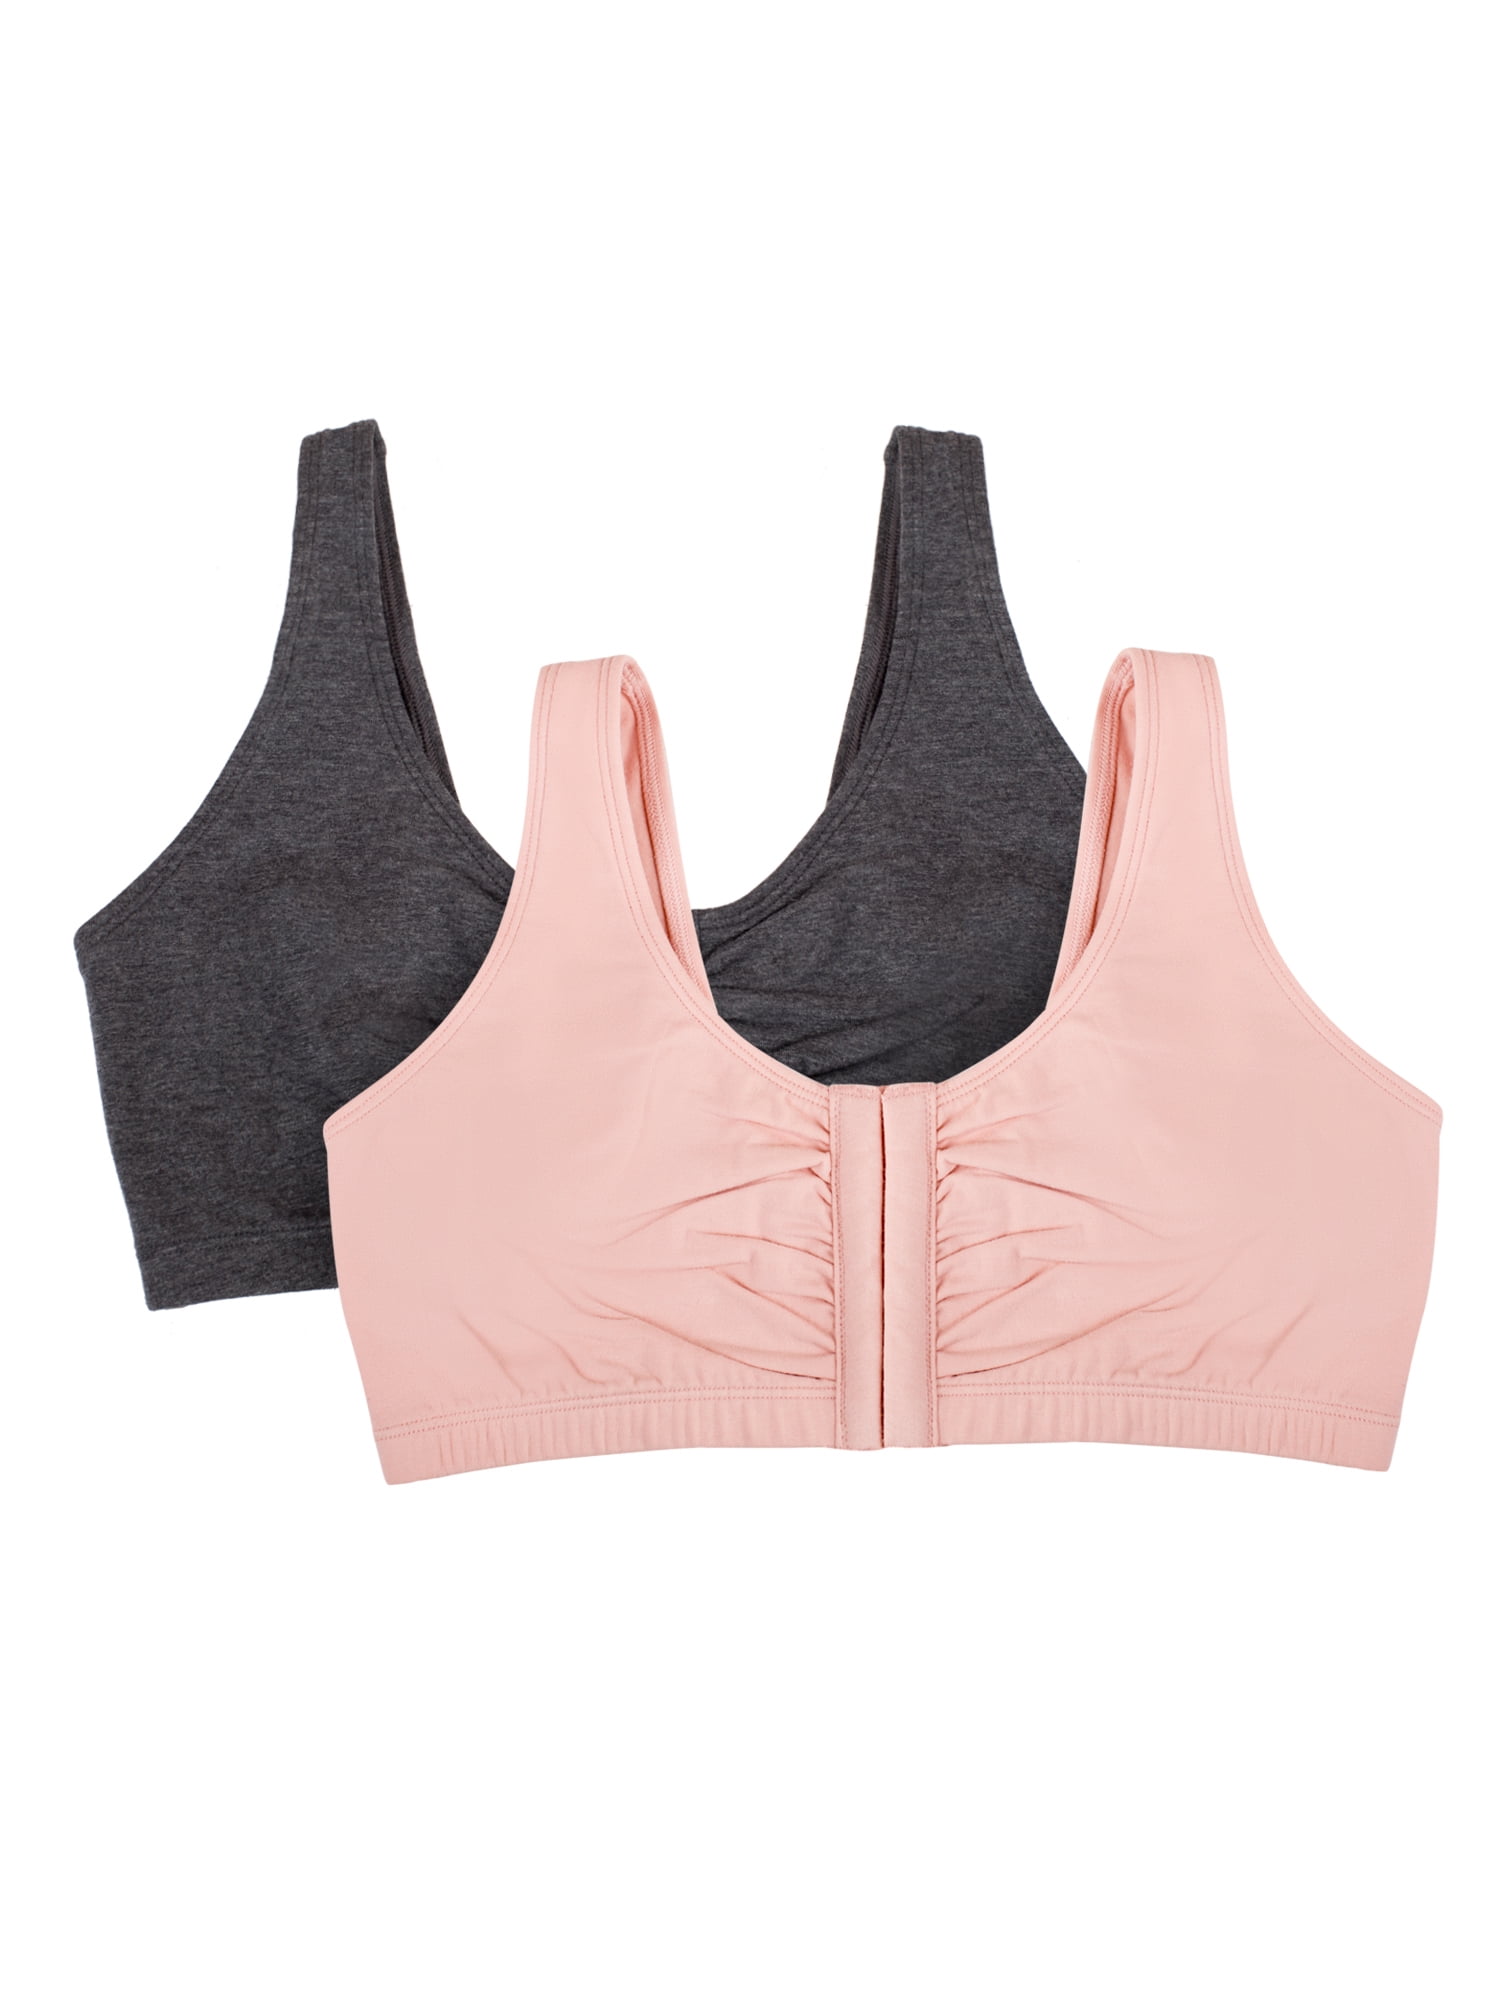 Fruit of the Loom Women's Comfort Front-Close Sports Bra Size 40, 46 